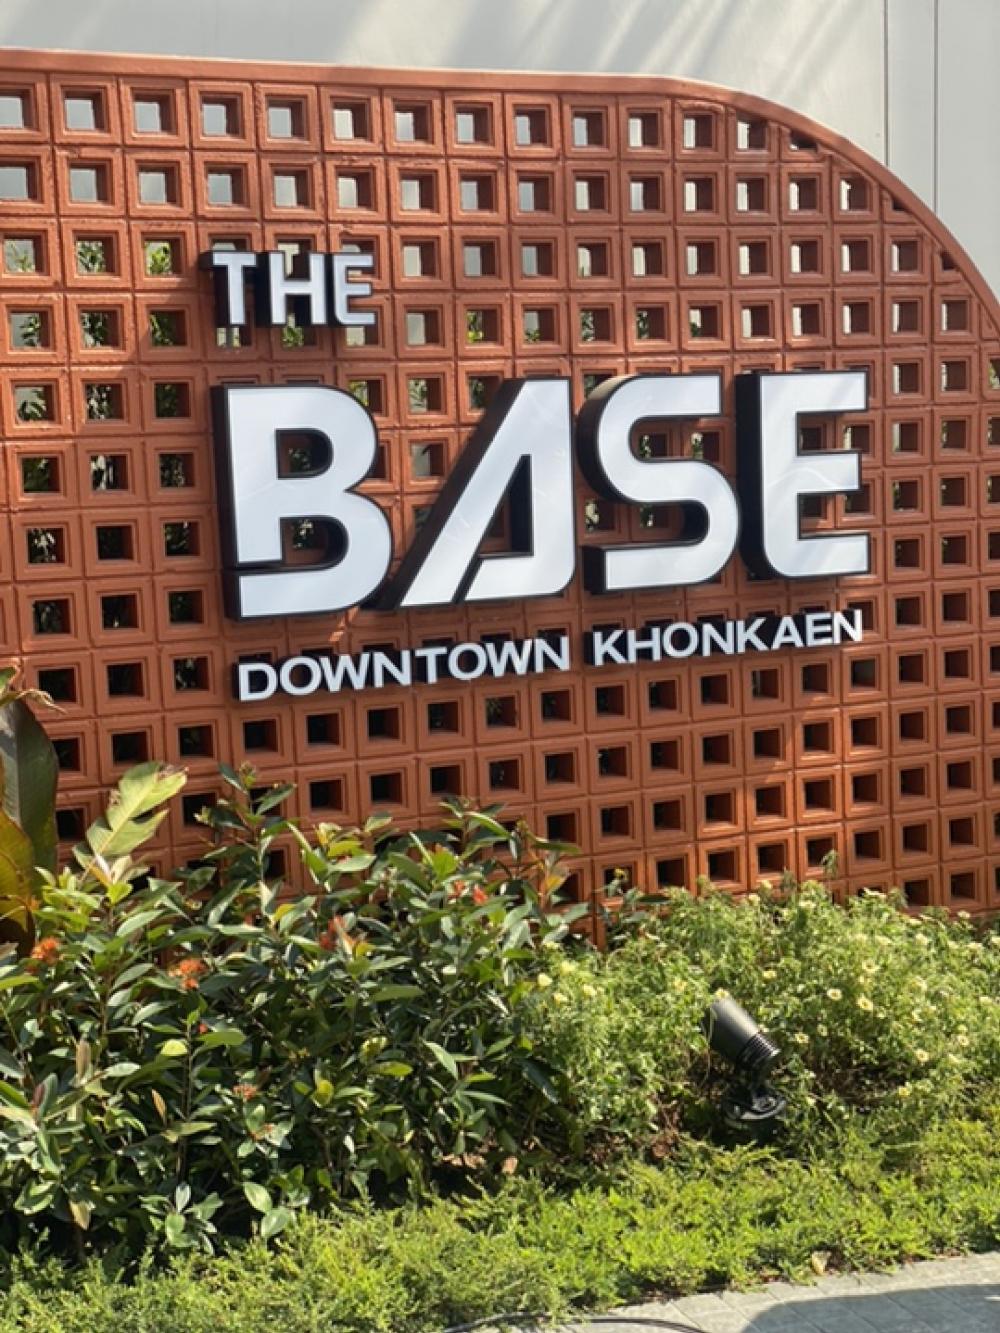 For SaleCondoKhon Kaen : 💚 The Base Downtown Khonkaen 🤎 2 bedrooms, 47 sq m. Starting at 3.574 million baht* and reservation + contract 30,000 baht. To make an appointment to visit, contact Teeranote (Sale Project) 081-6507927 😃